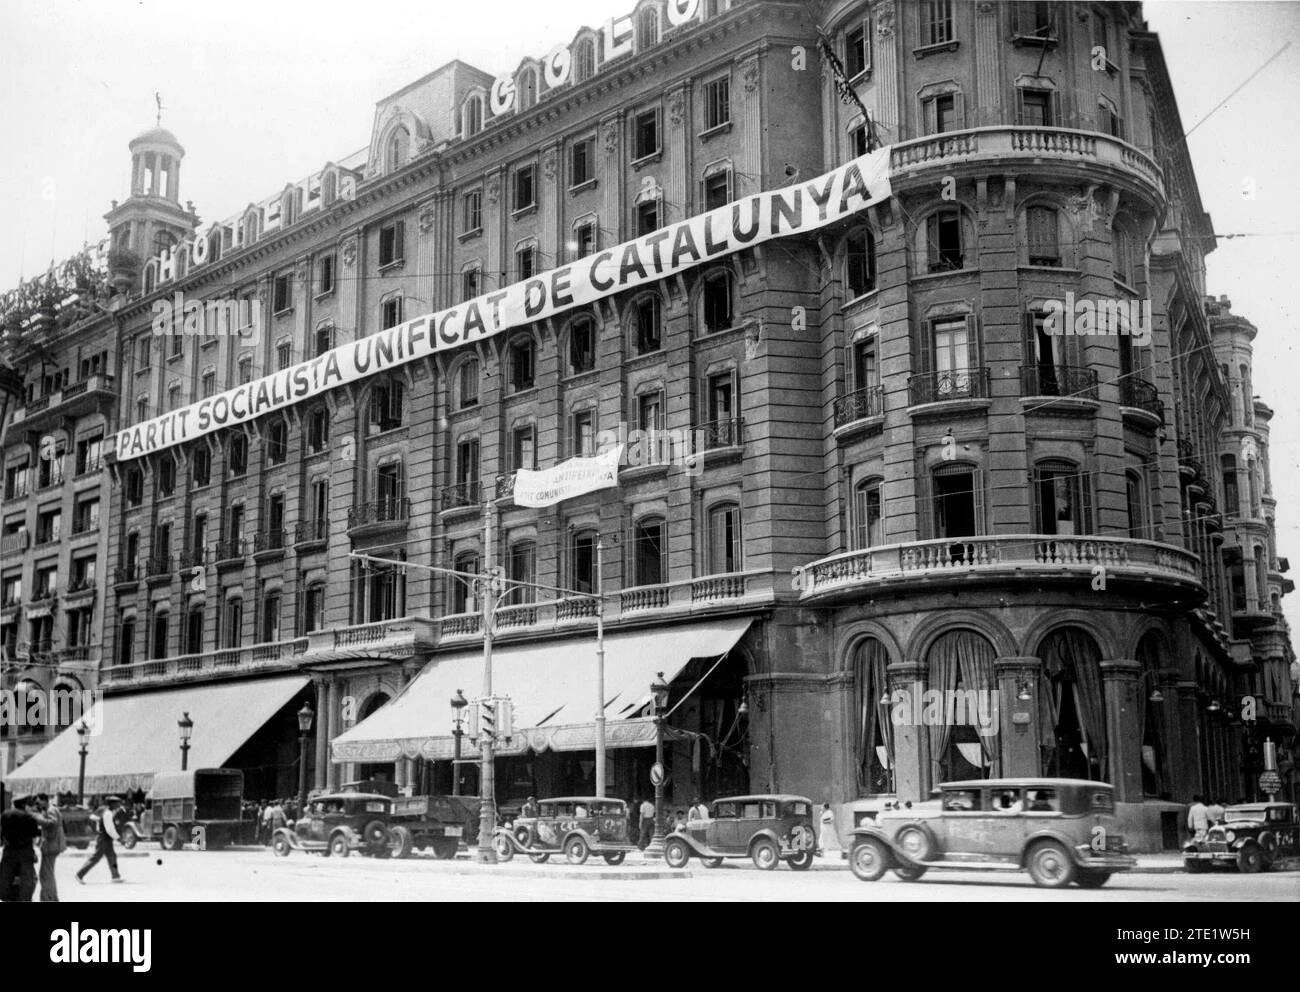 09/30/1936. The Colón Hotel building requisitioned by the Unified Socialist Party of Catalonia (Psuc). Credit: Album / Archivo ABC / Josep Brangulí Stock Photo